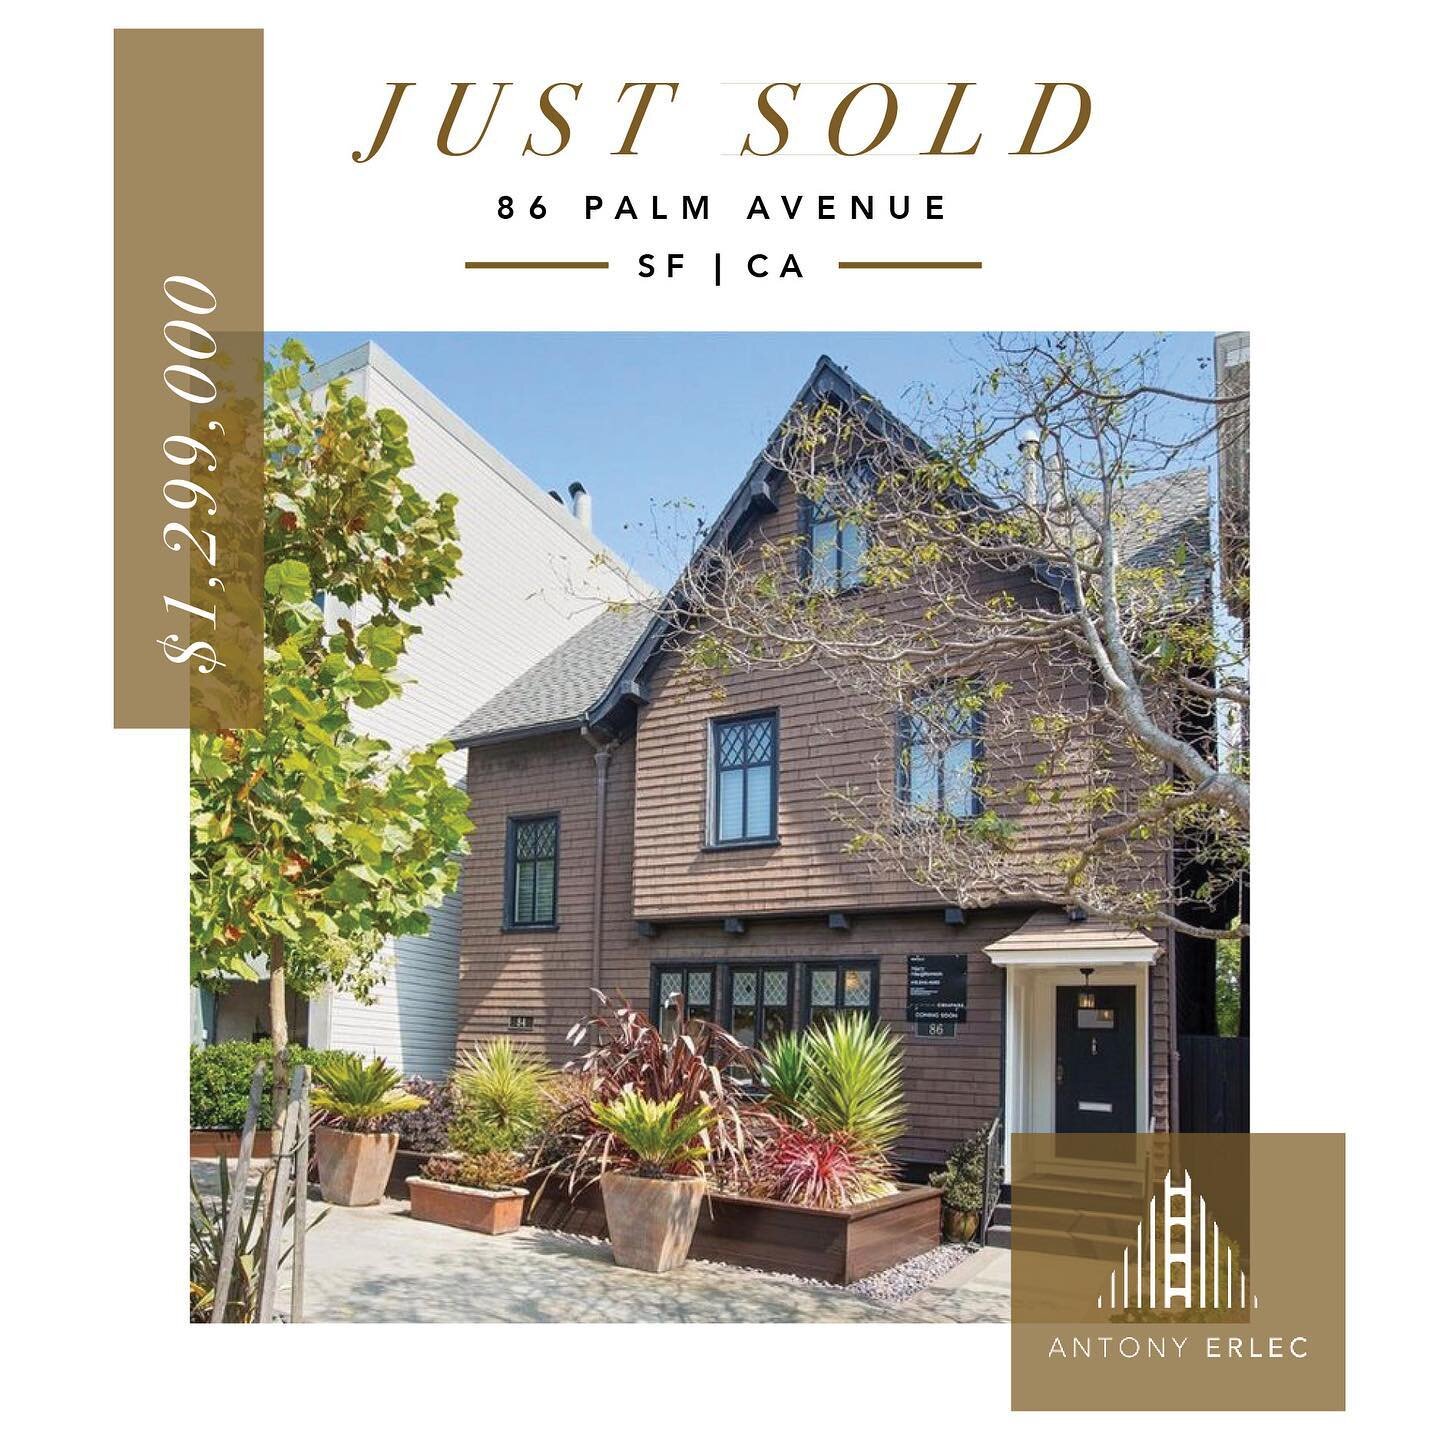 Just Sold! This timeless Jordan Park gem has new owners just in time for Thanksgiving. After working with my clients for some time, this beautiful home came to market in their desired area - Jordan Park - and we jumped on it immediately. Once they to